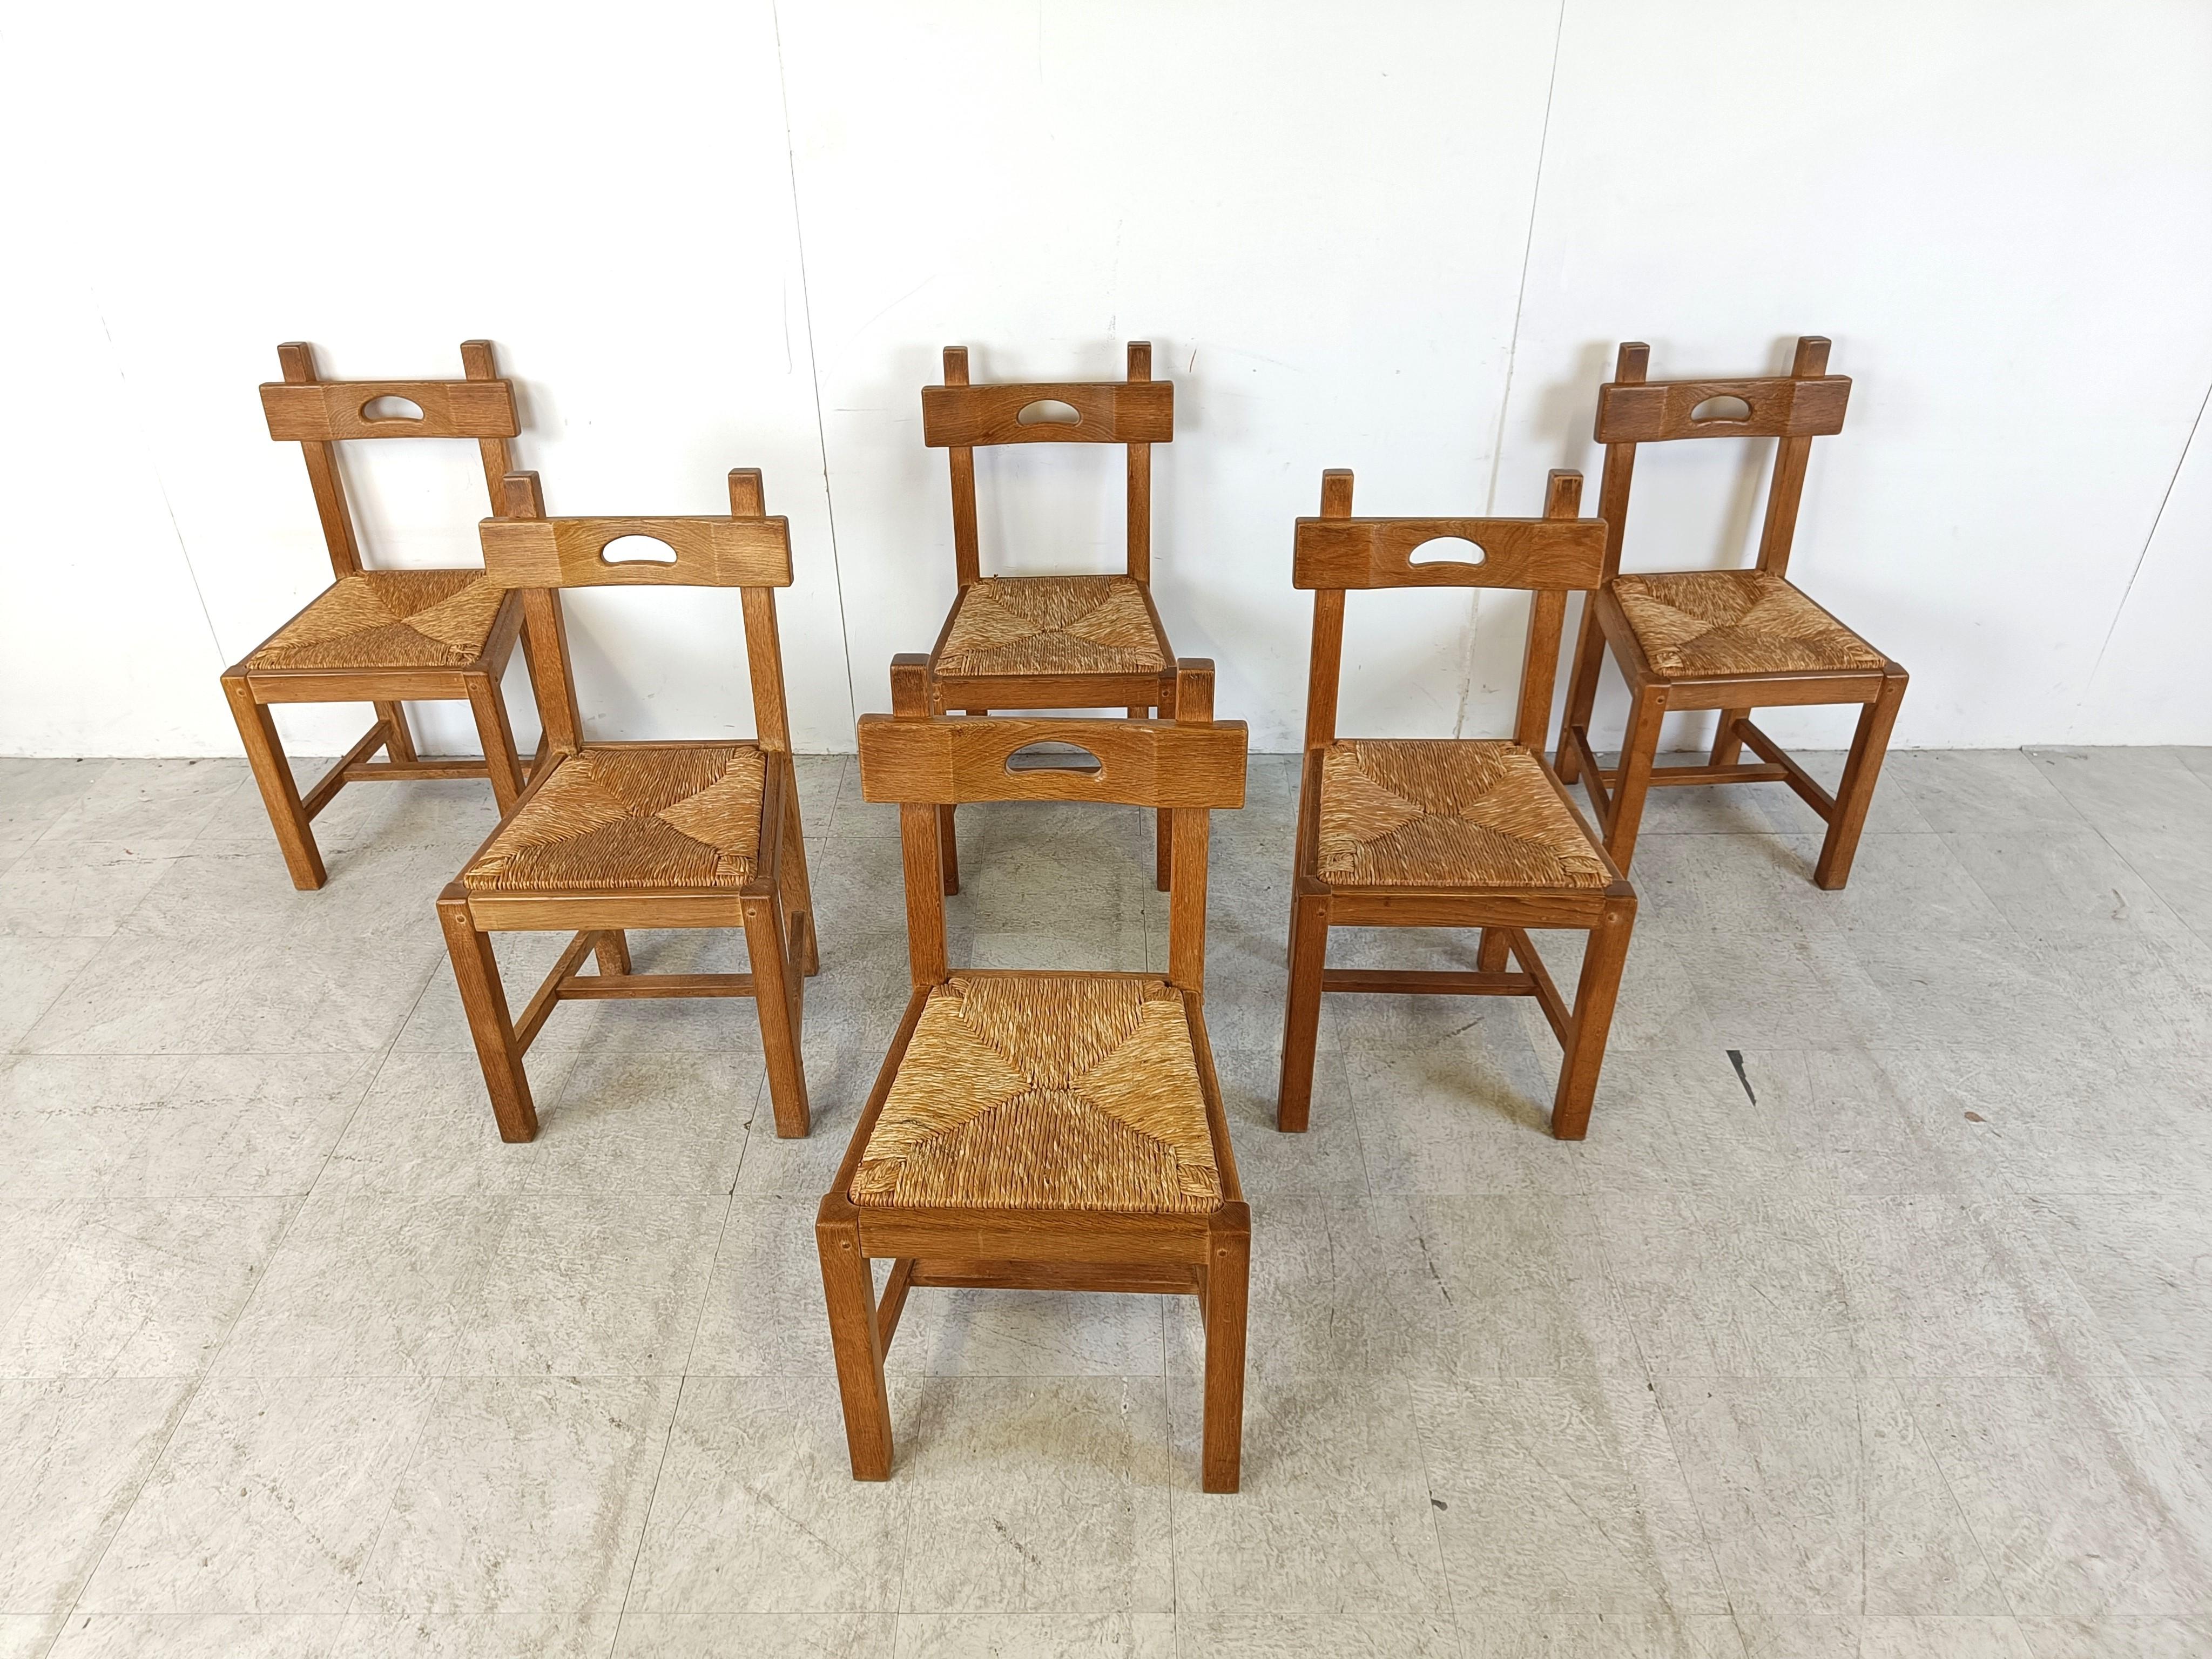 Rustic wicker and oak dining chairs.

Well made sturdy frames with some nice wicker seats.

1960s - Belgium

Good condition.

Dimensions:
Height: 87cm/34.25